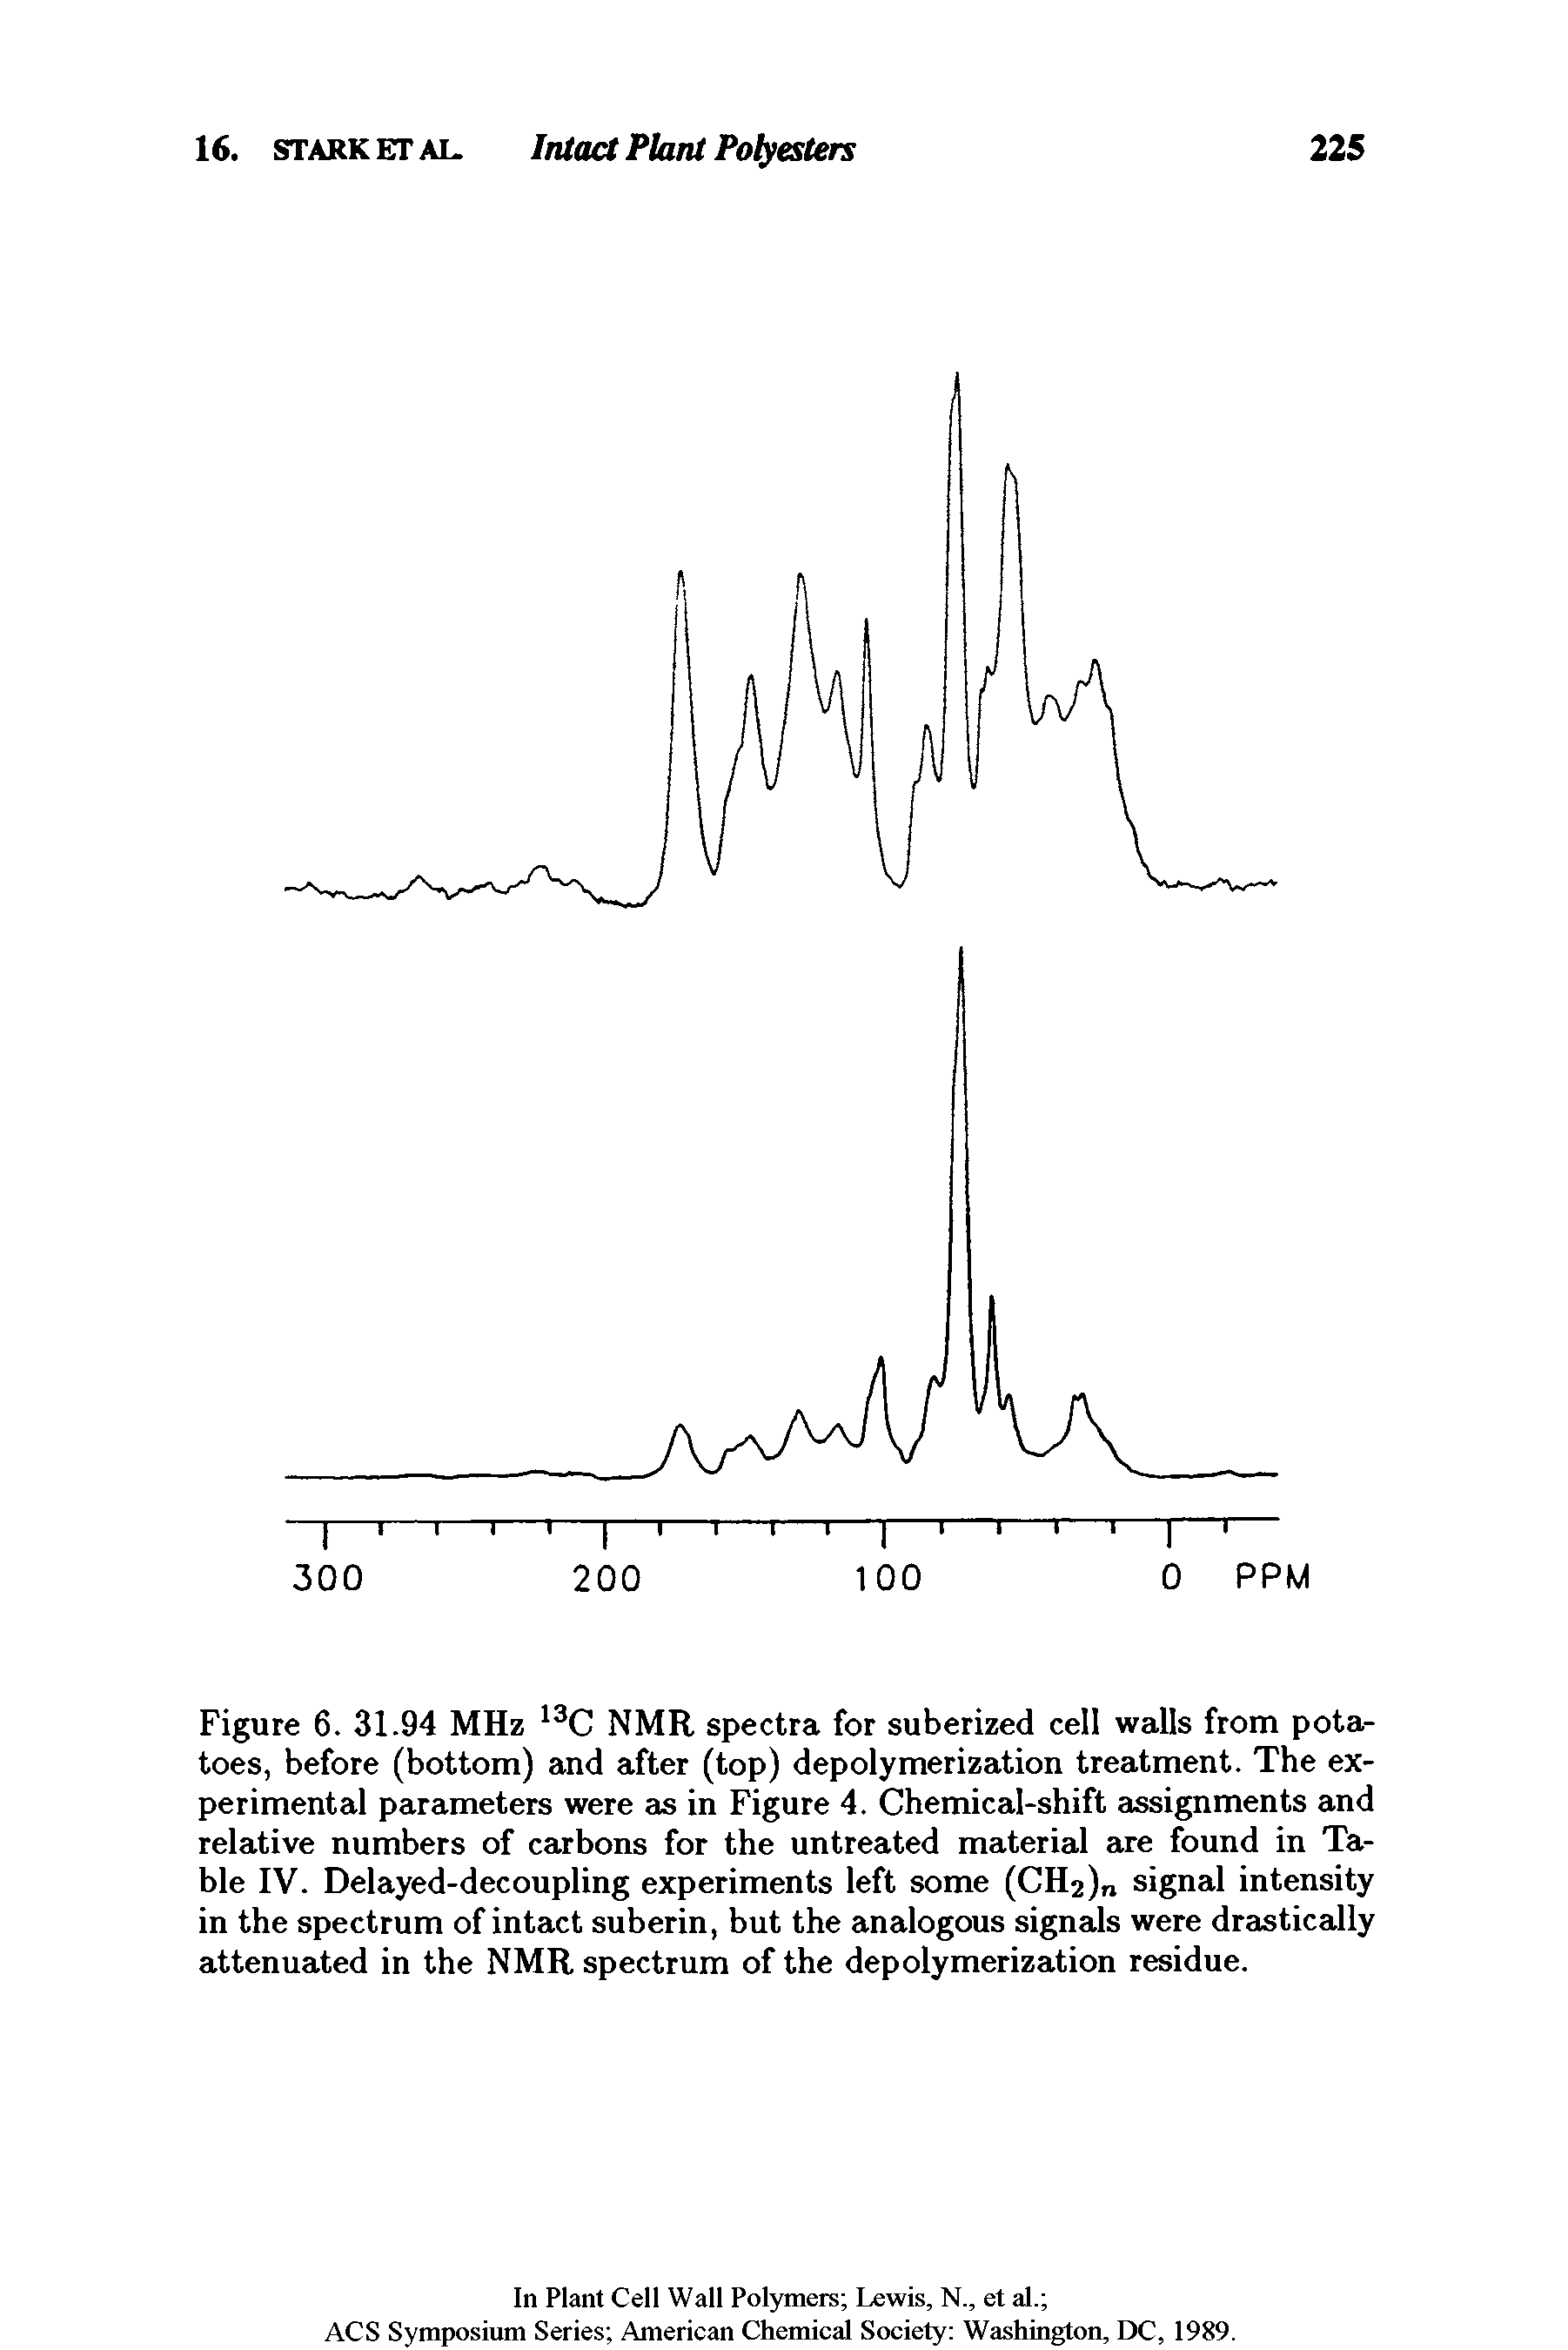 Figure 6. 31.94 MHz 13C NMR spectra for suberized cell walls from potatoes, before (bottom) and after (top) depolymerization treatment. The experimental parameters were as in Figure 4. Chemical-shift assignments and relative numbers of carbons for the untreated material are found in Table IV. Delayed-decoupling experiments left some (CH2) signal intensity in the spectrum of intact suberin, but the analogous signals were drastically attenuated in the NMR spectrum of the depolymerization residue.